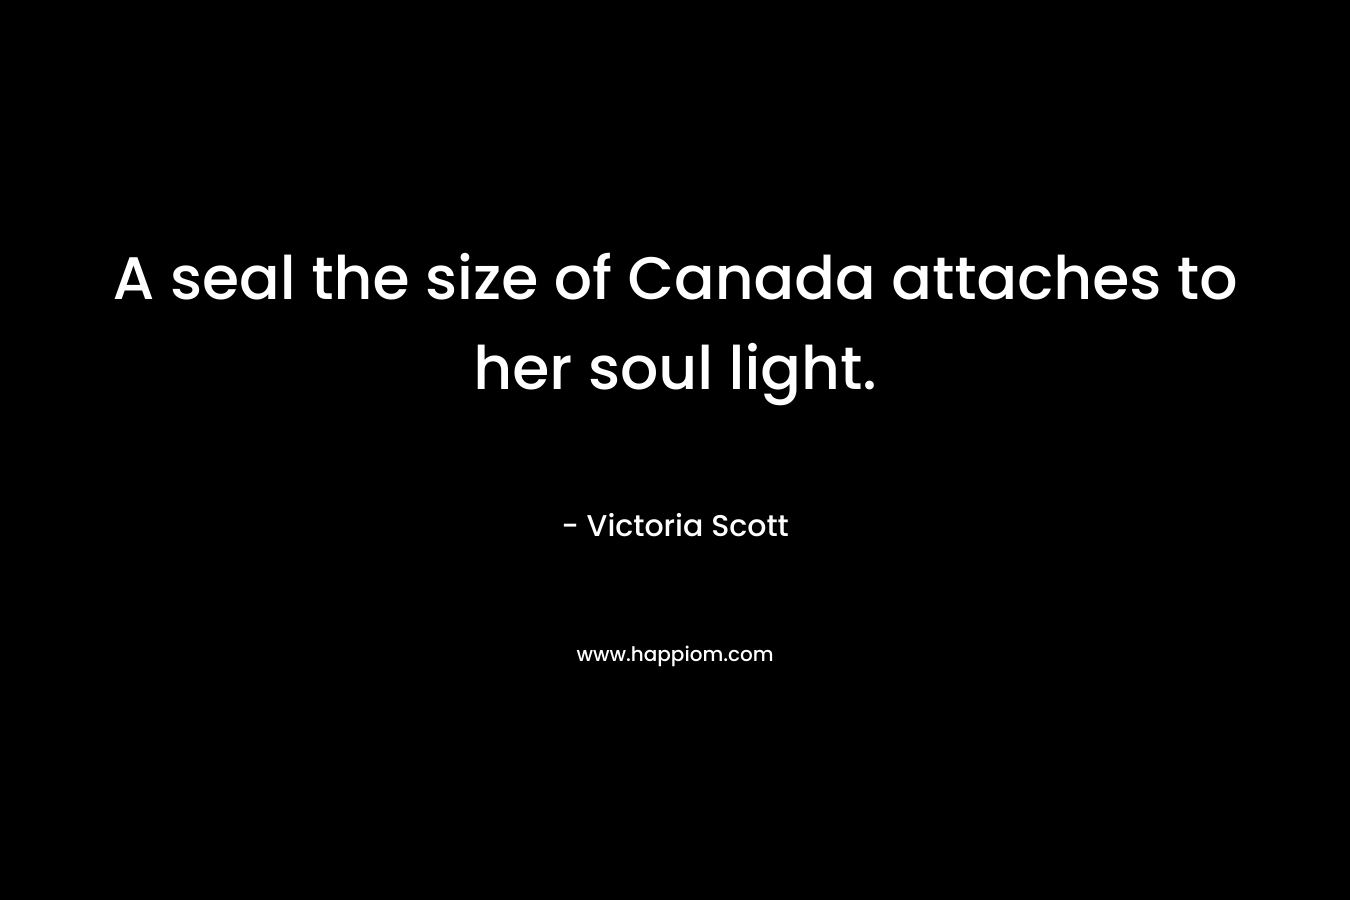 A seal the size of Canada attaches to her soul light. – Victoria Scott